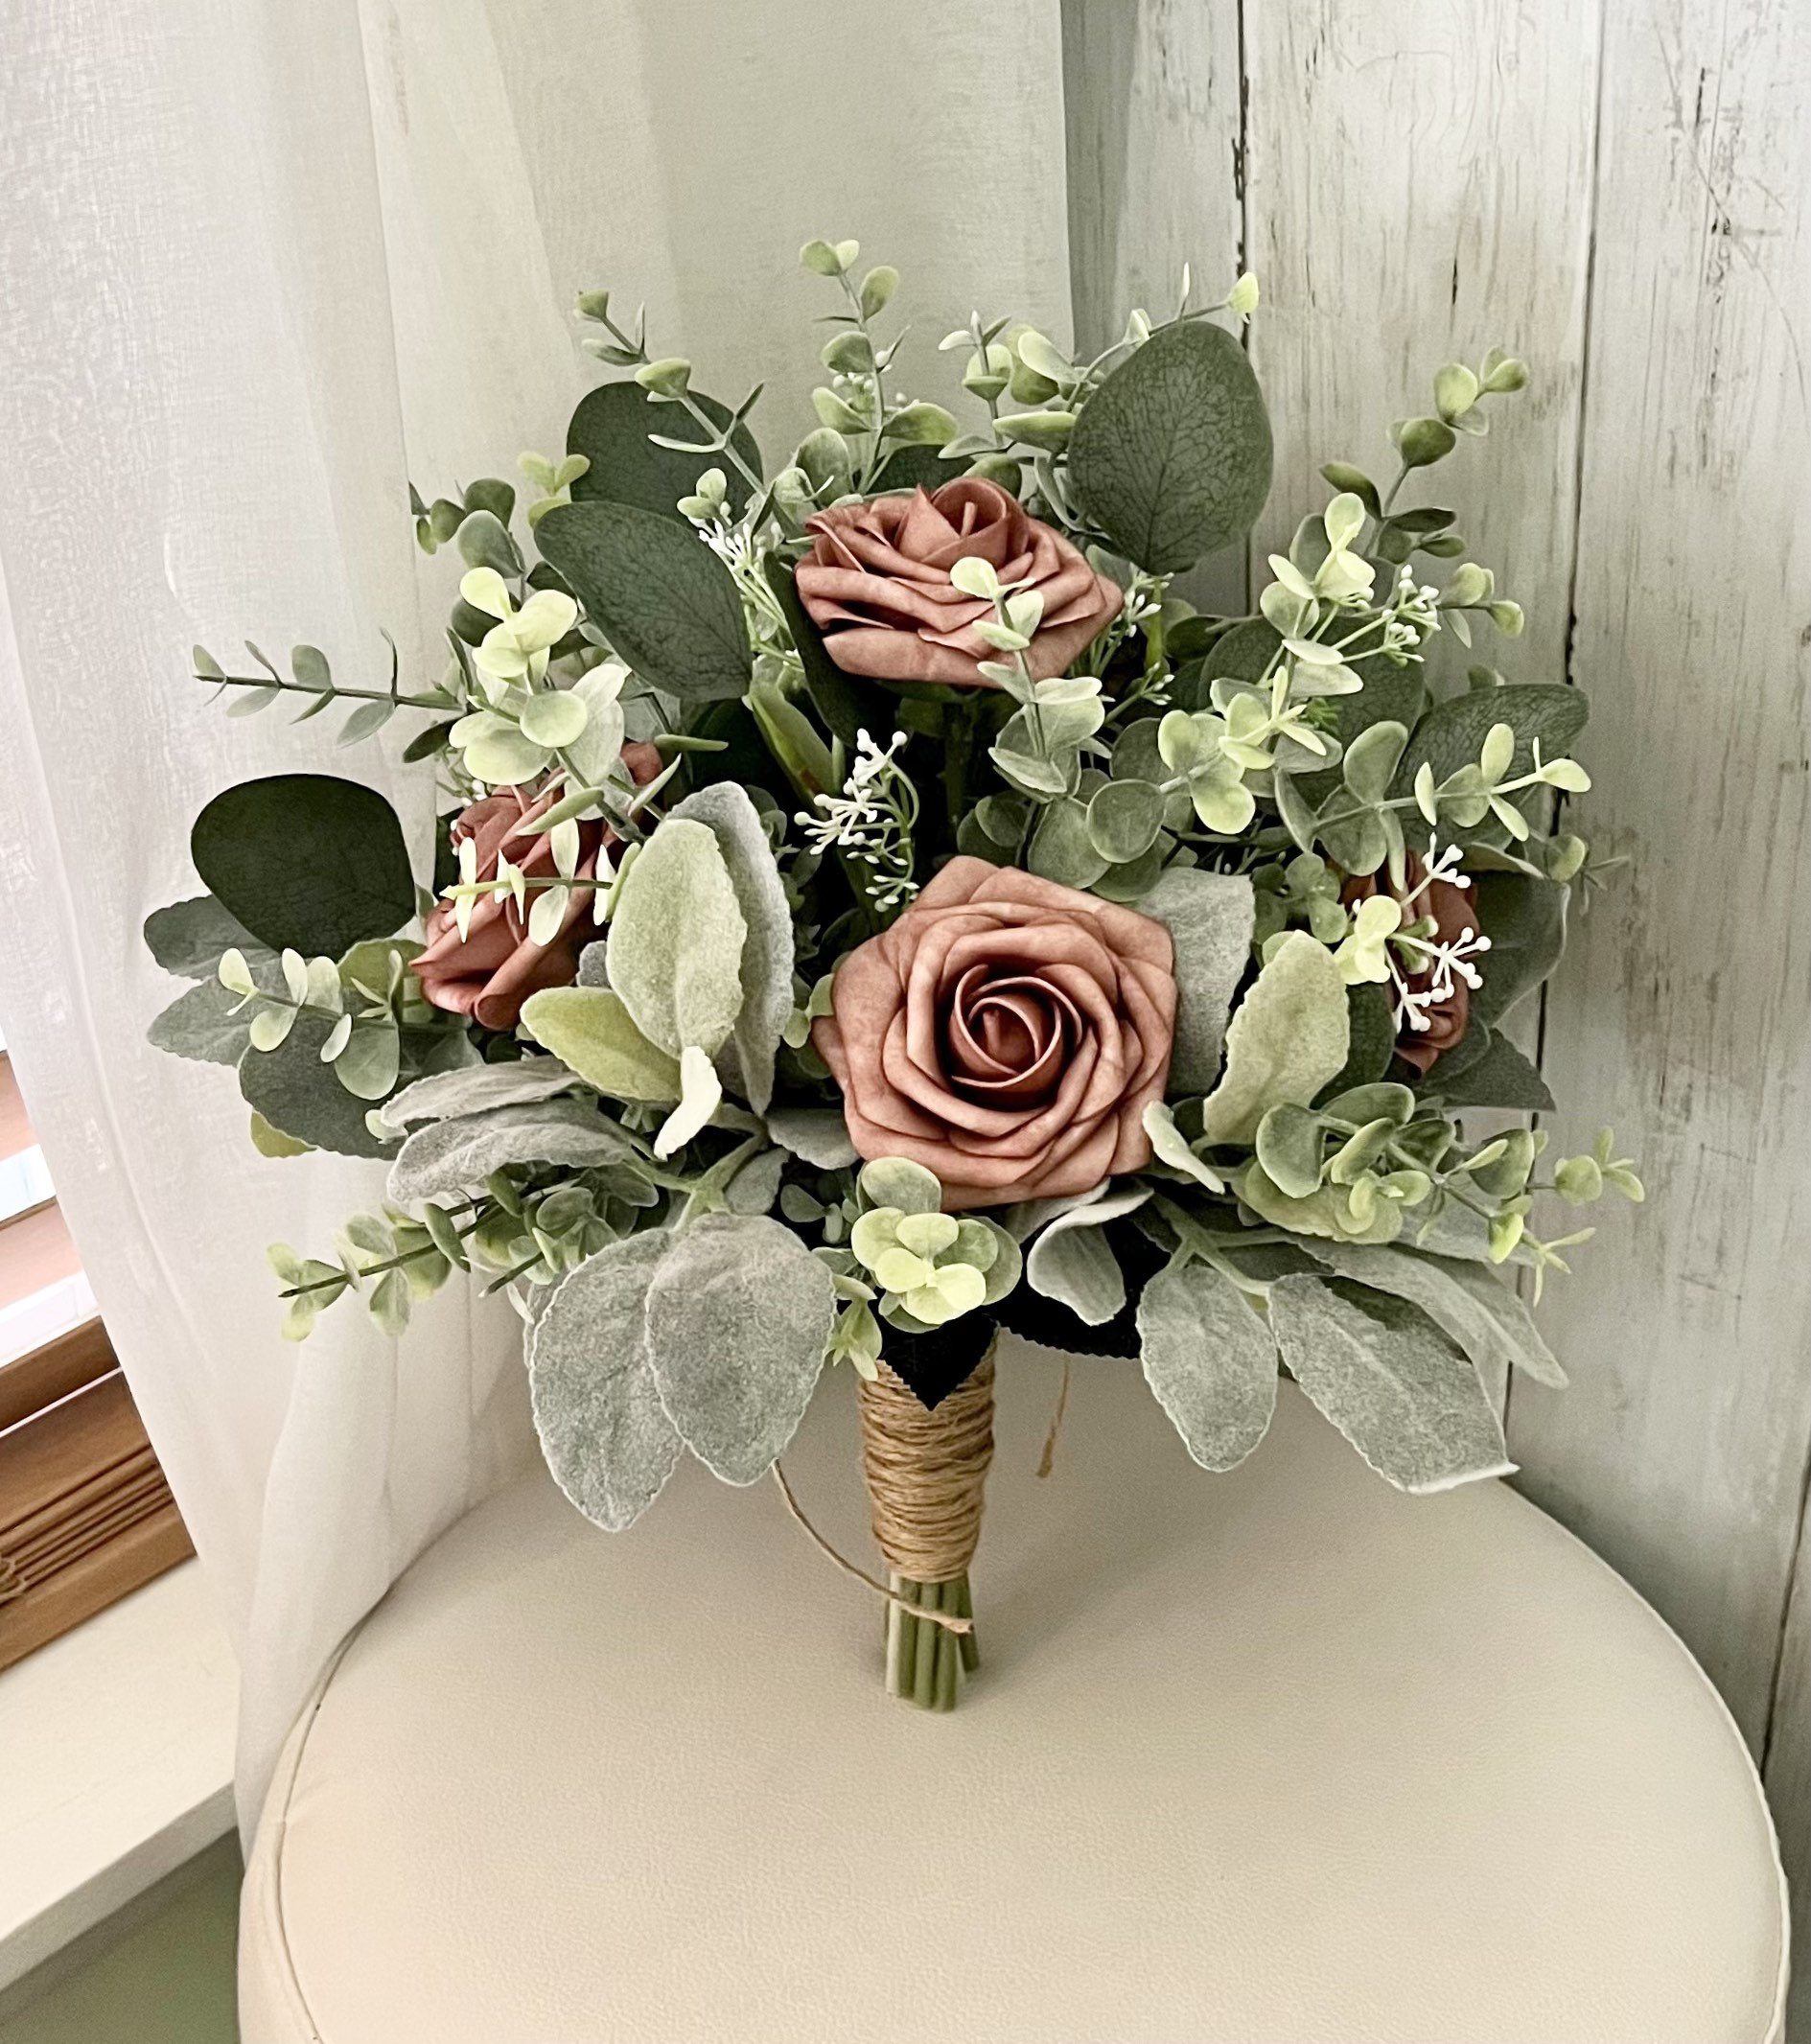 Hand Held Artificial Rose Bridal Bouquet With Crystals Perfect Sage Green  Wedding Accessories For Brides And Bridos From Weddings_mall, $28.79